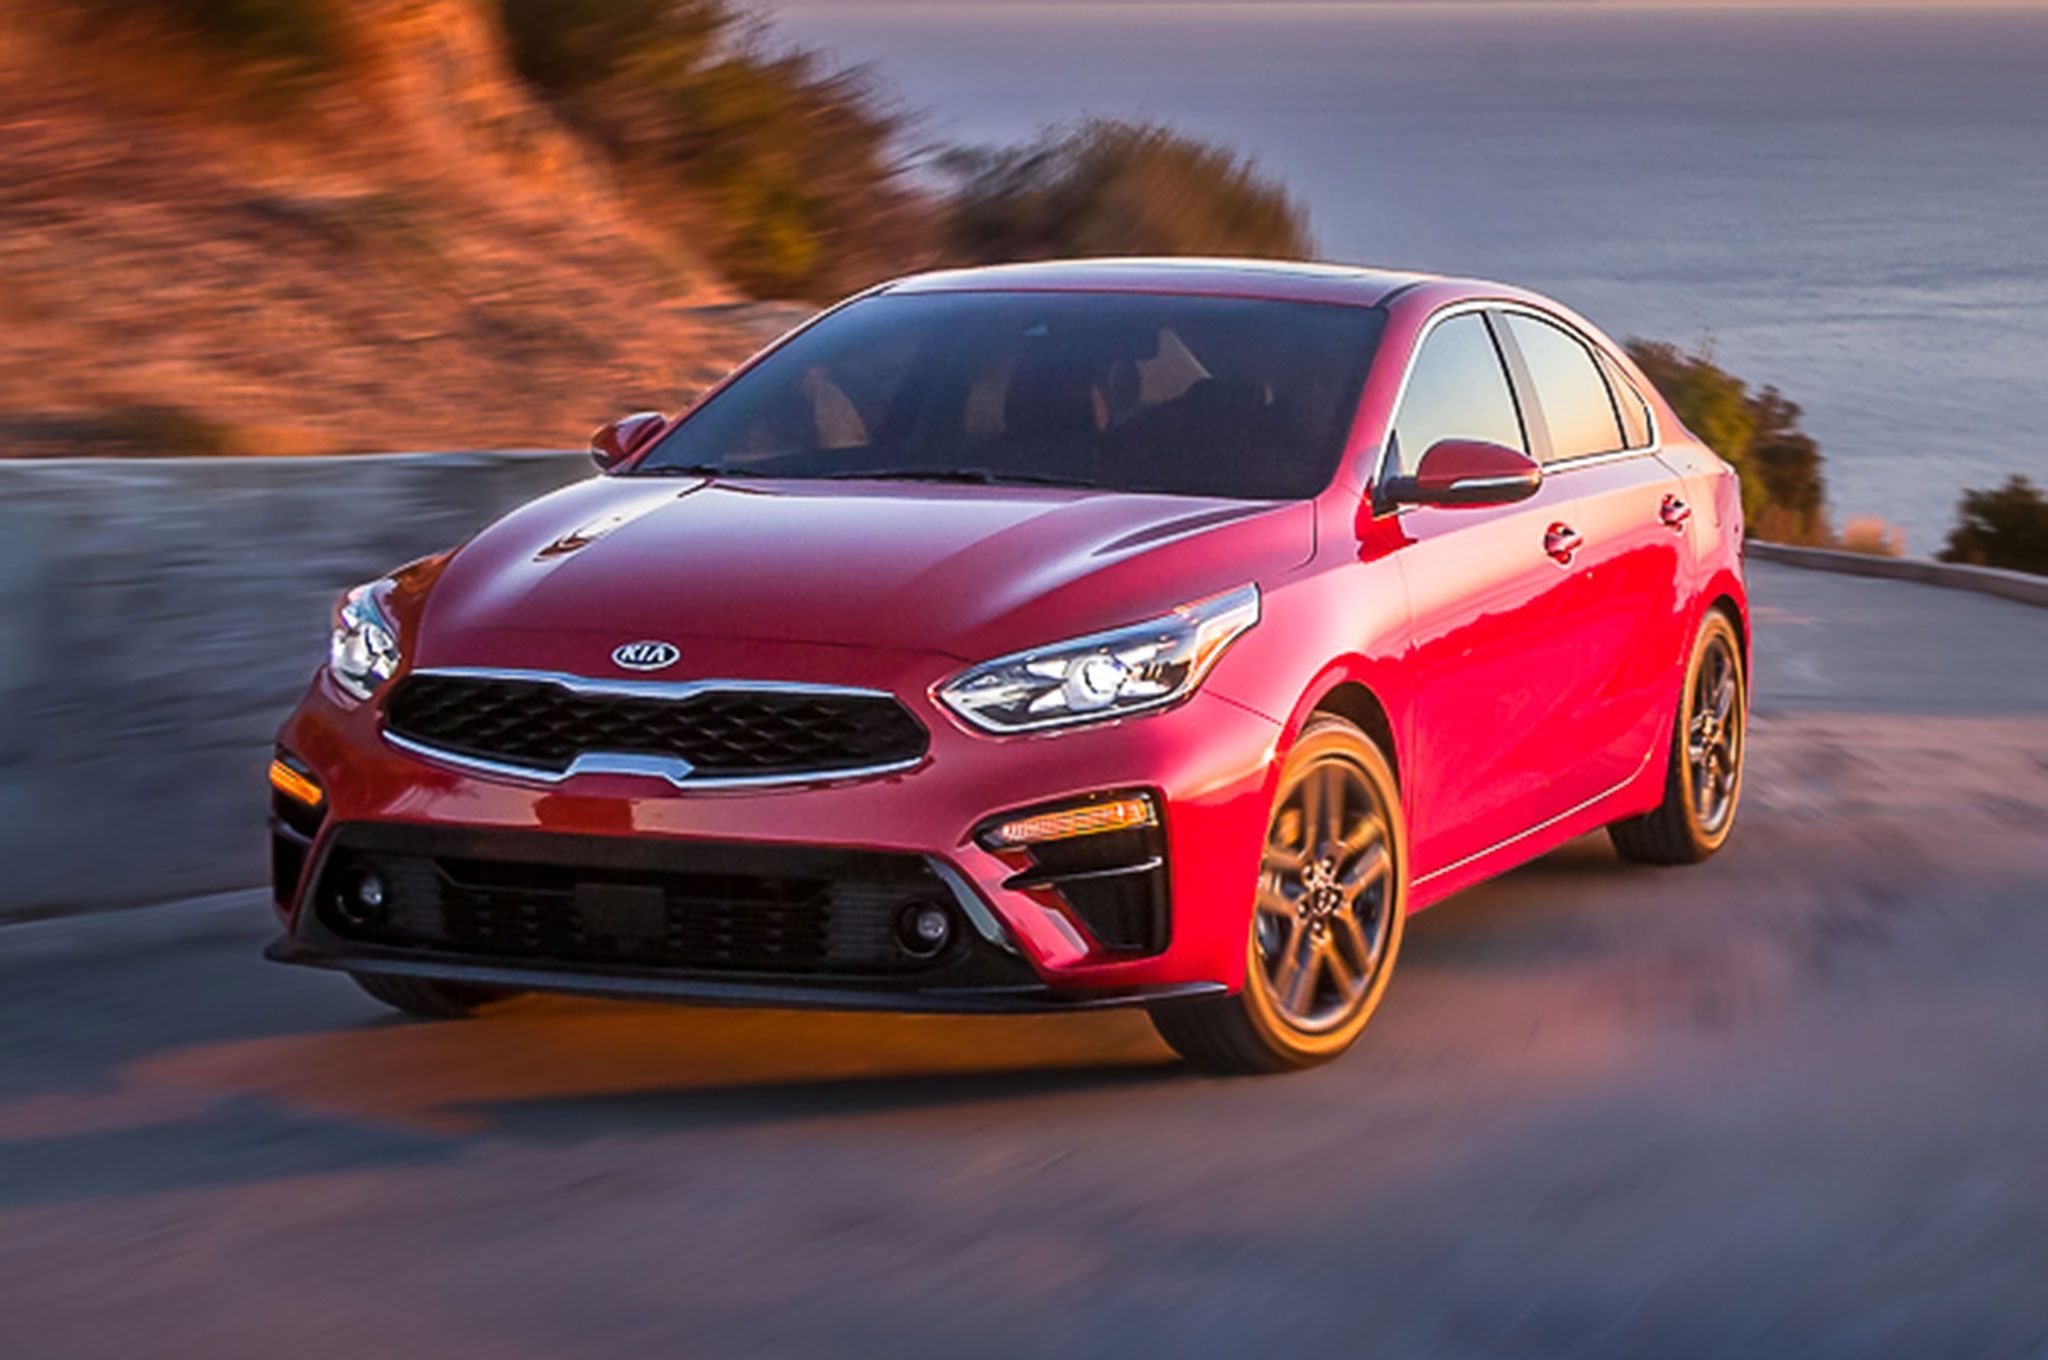 NEW Lease 2022 Kia Forte at AutoLux Sales and Leasing